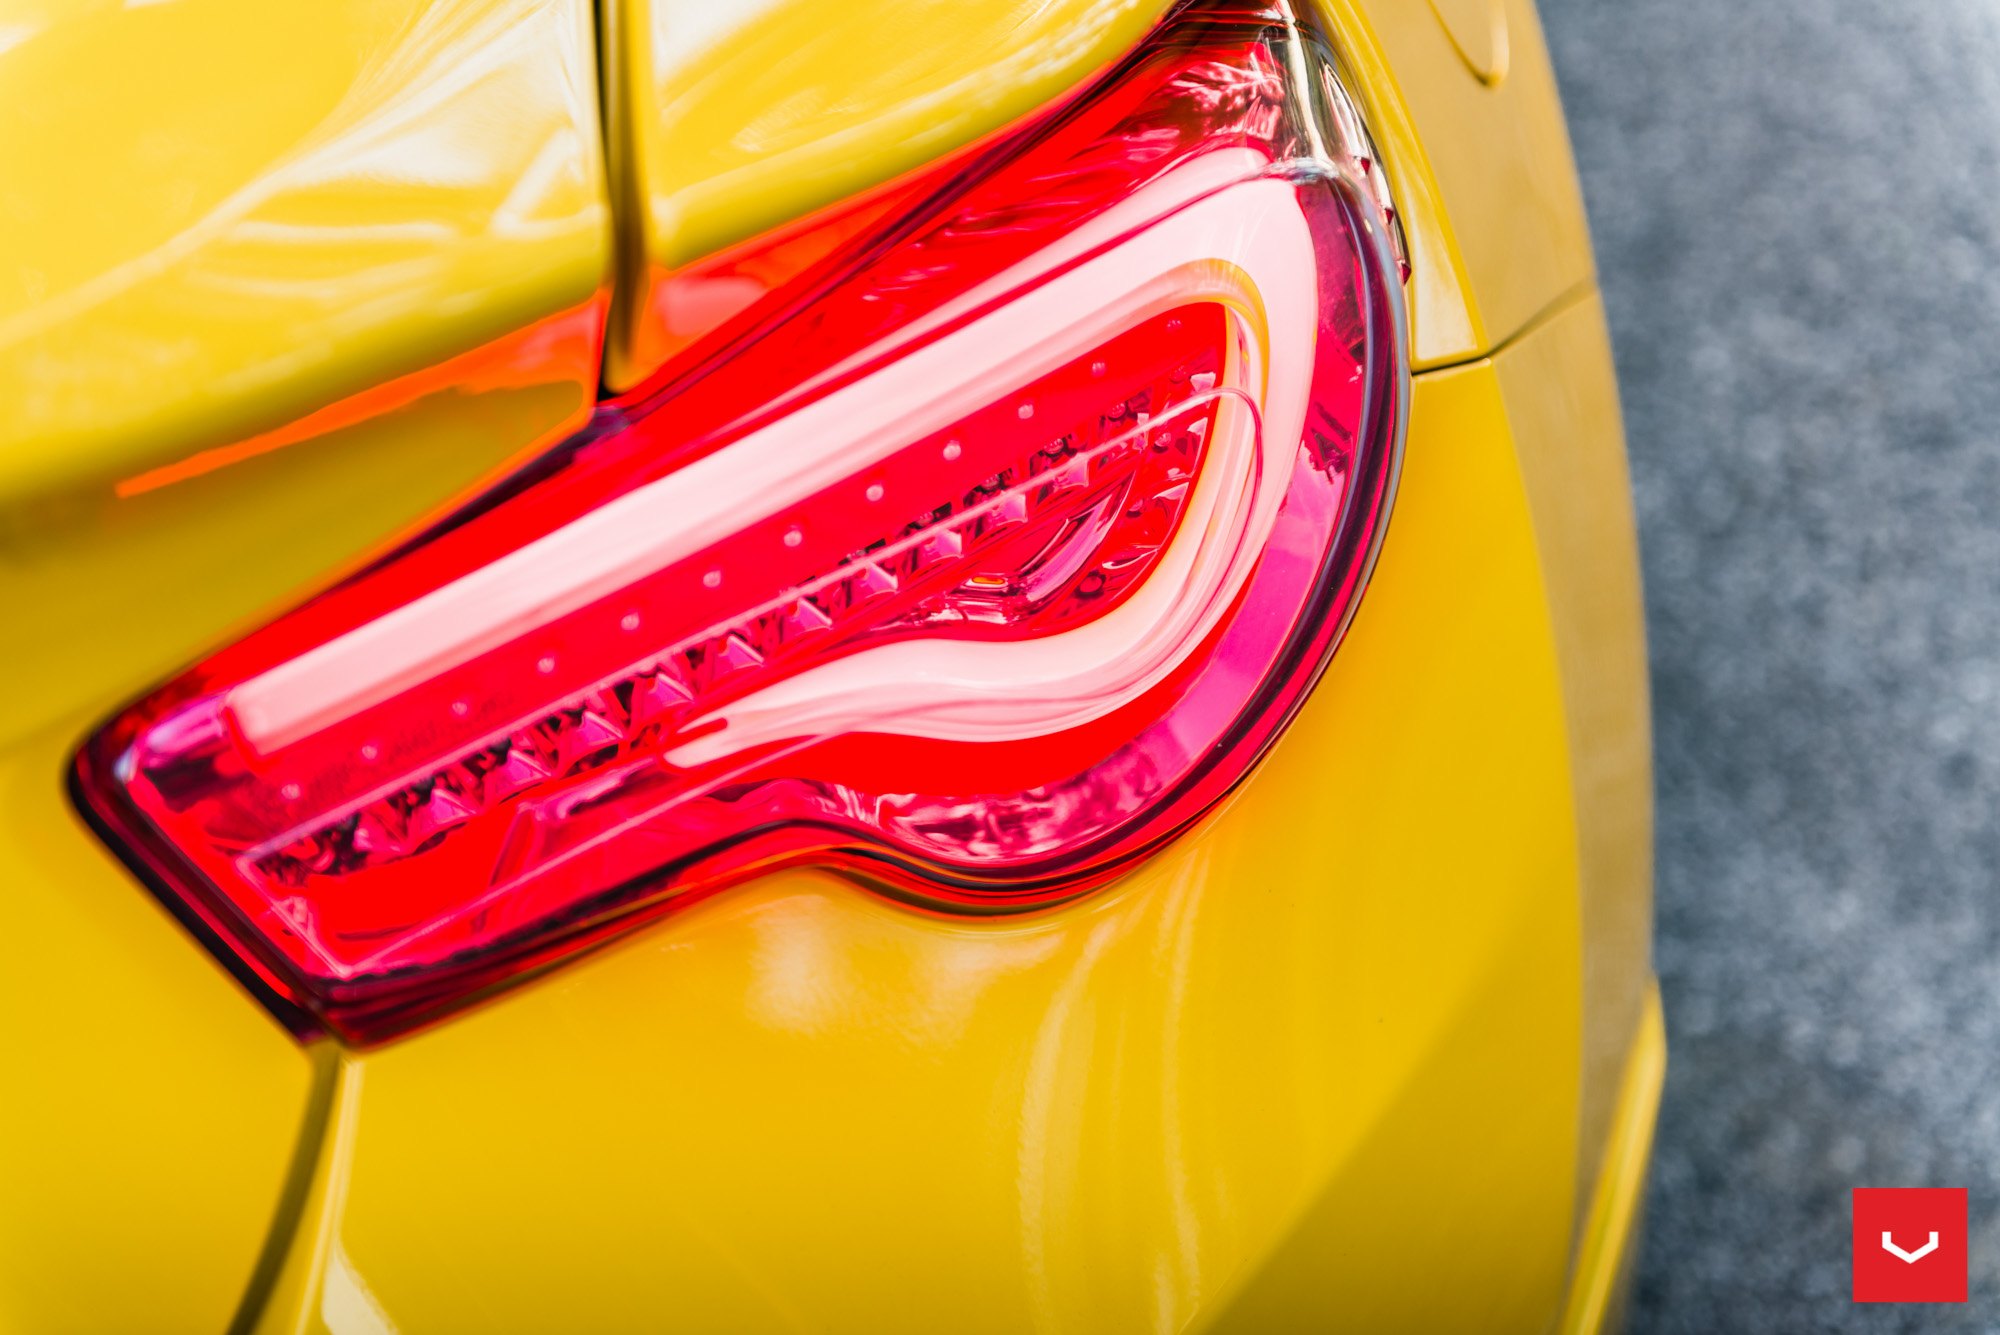 Red LED Taillights on Yellow Scion FR-S - Photo by Vossen